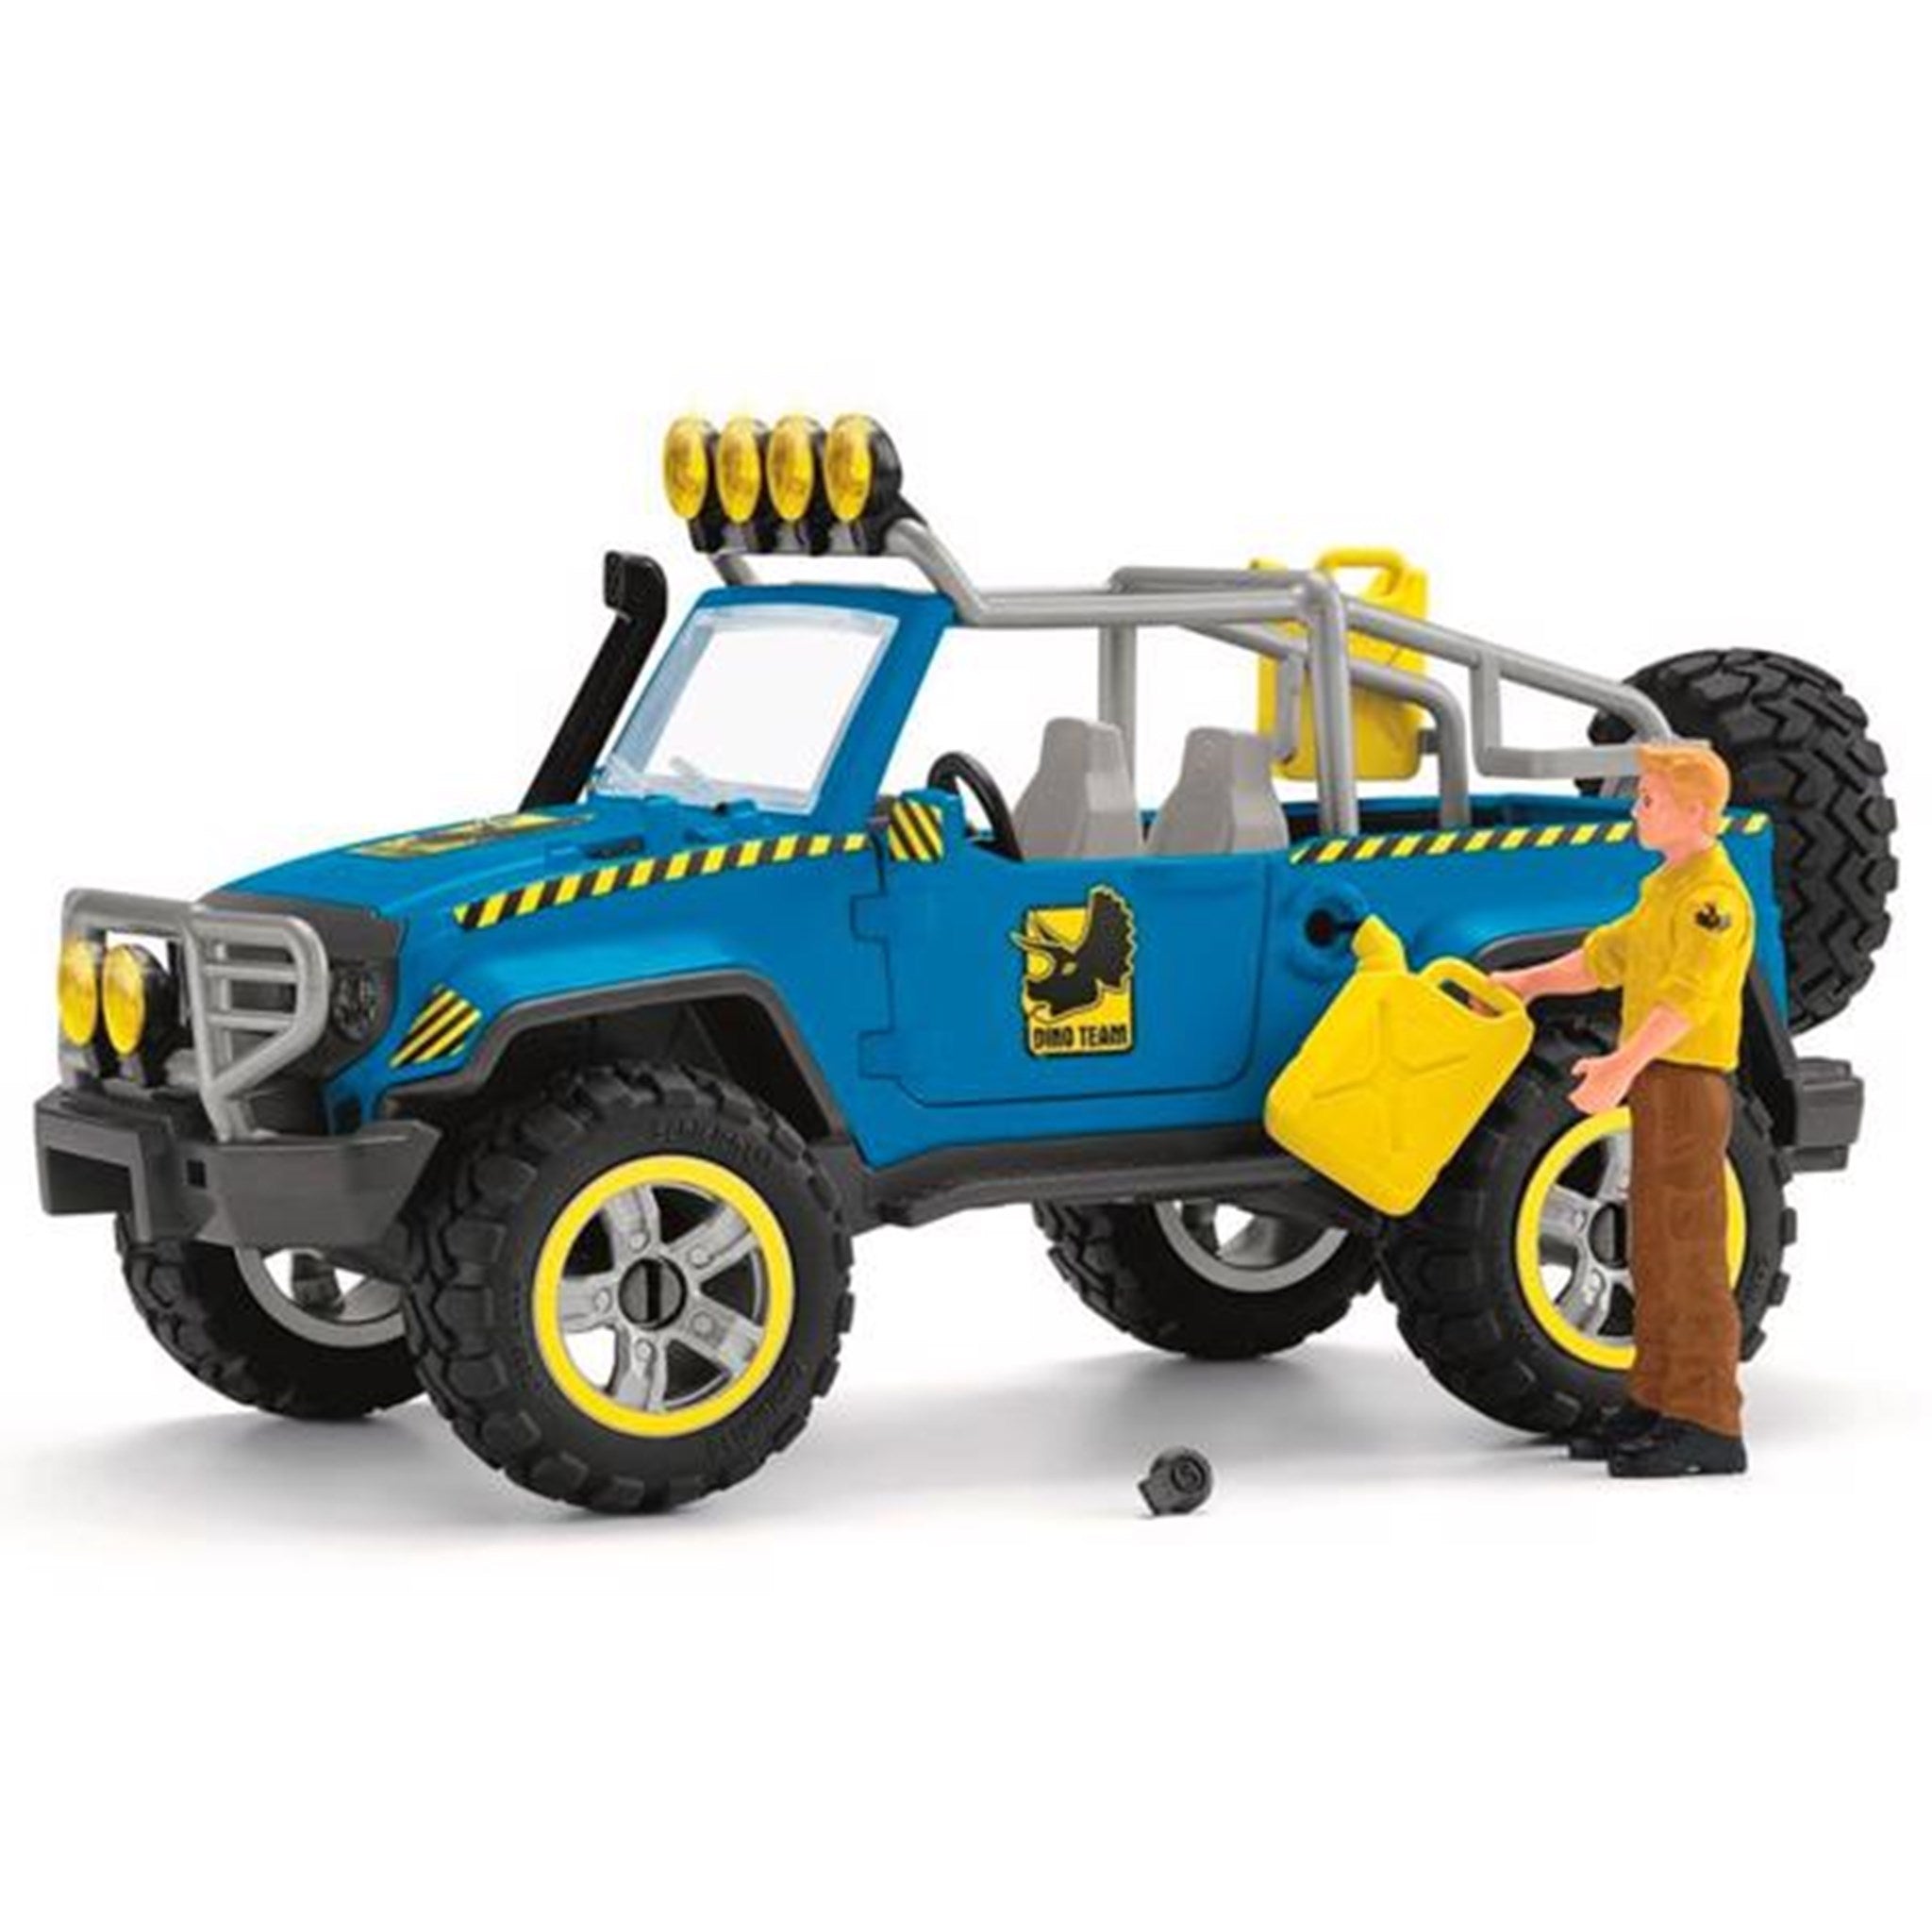 Schleich Dinosaurs Off-Road Vehicle w. Dino Outpost 2